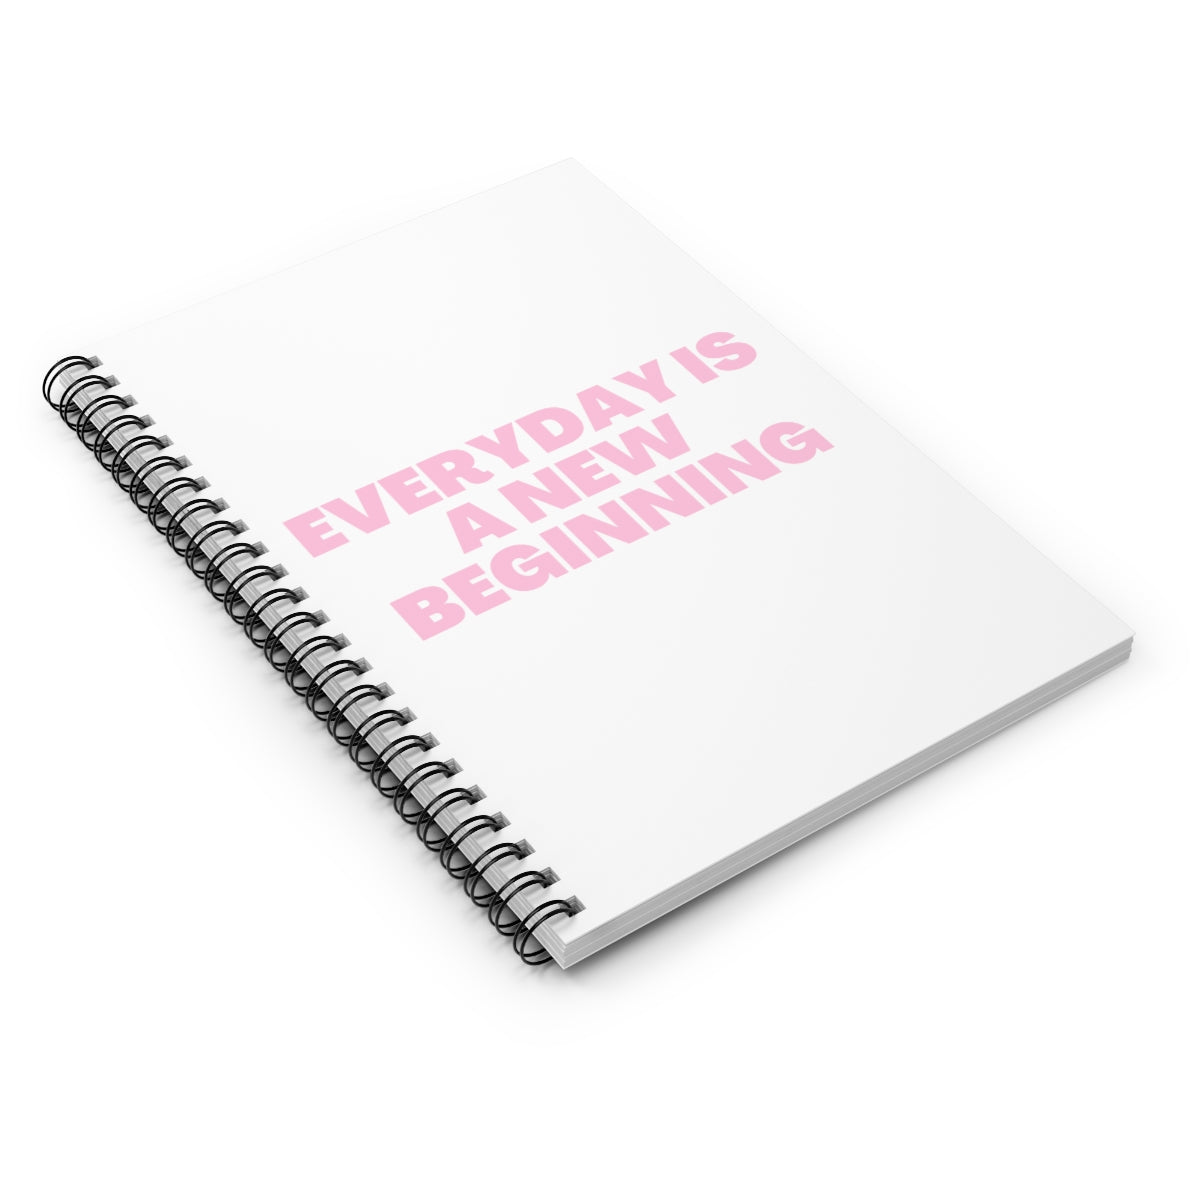 Everyday Is A New Beginning Motivational Durable Journal- Motivational Notebook, Inspirational Notebooks, Women’s Inspirational Journal, Self-Care Gift for Friends, Daily Motivational Journal